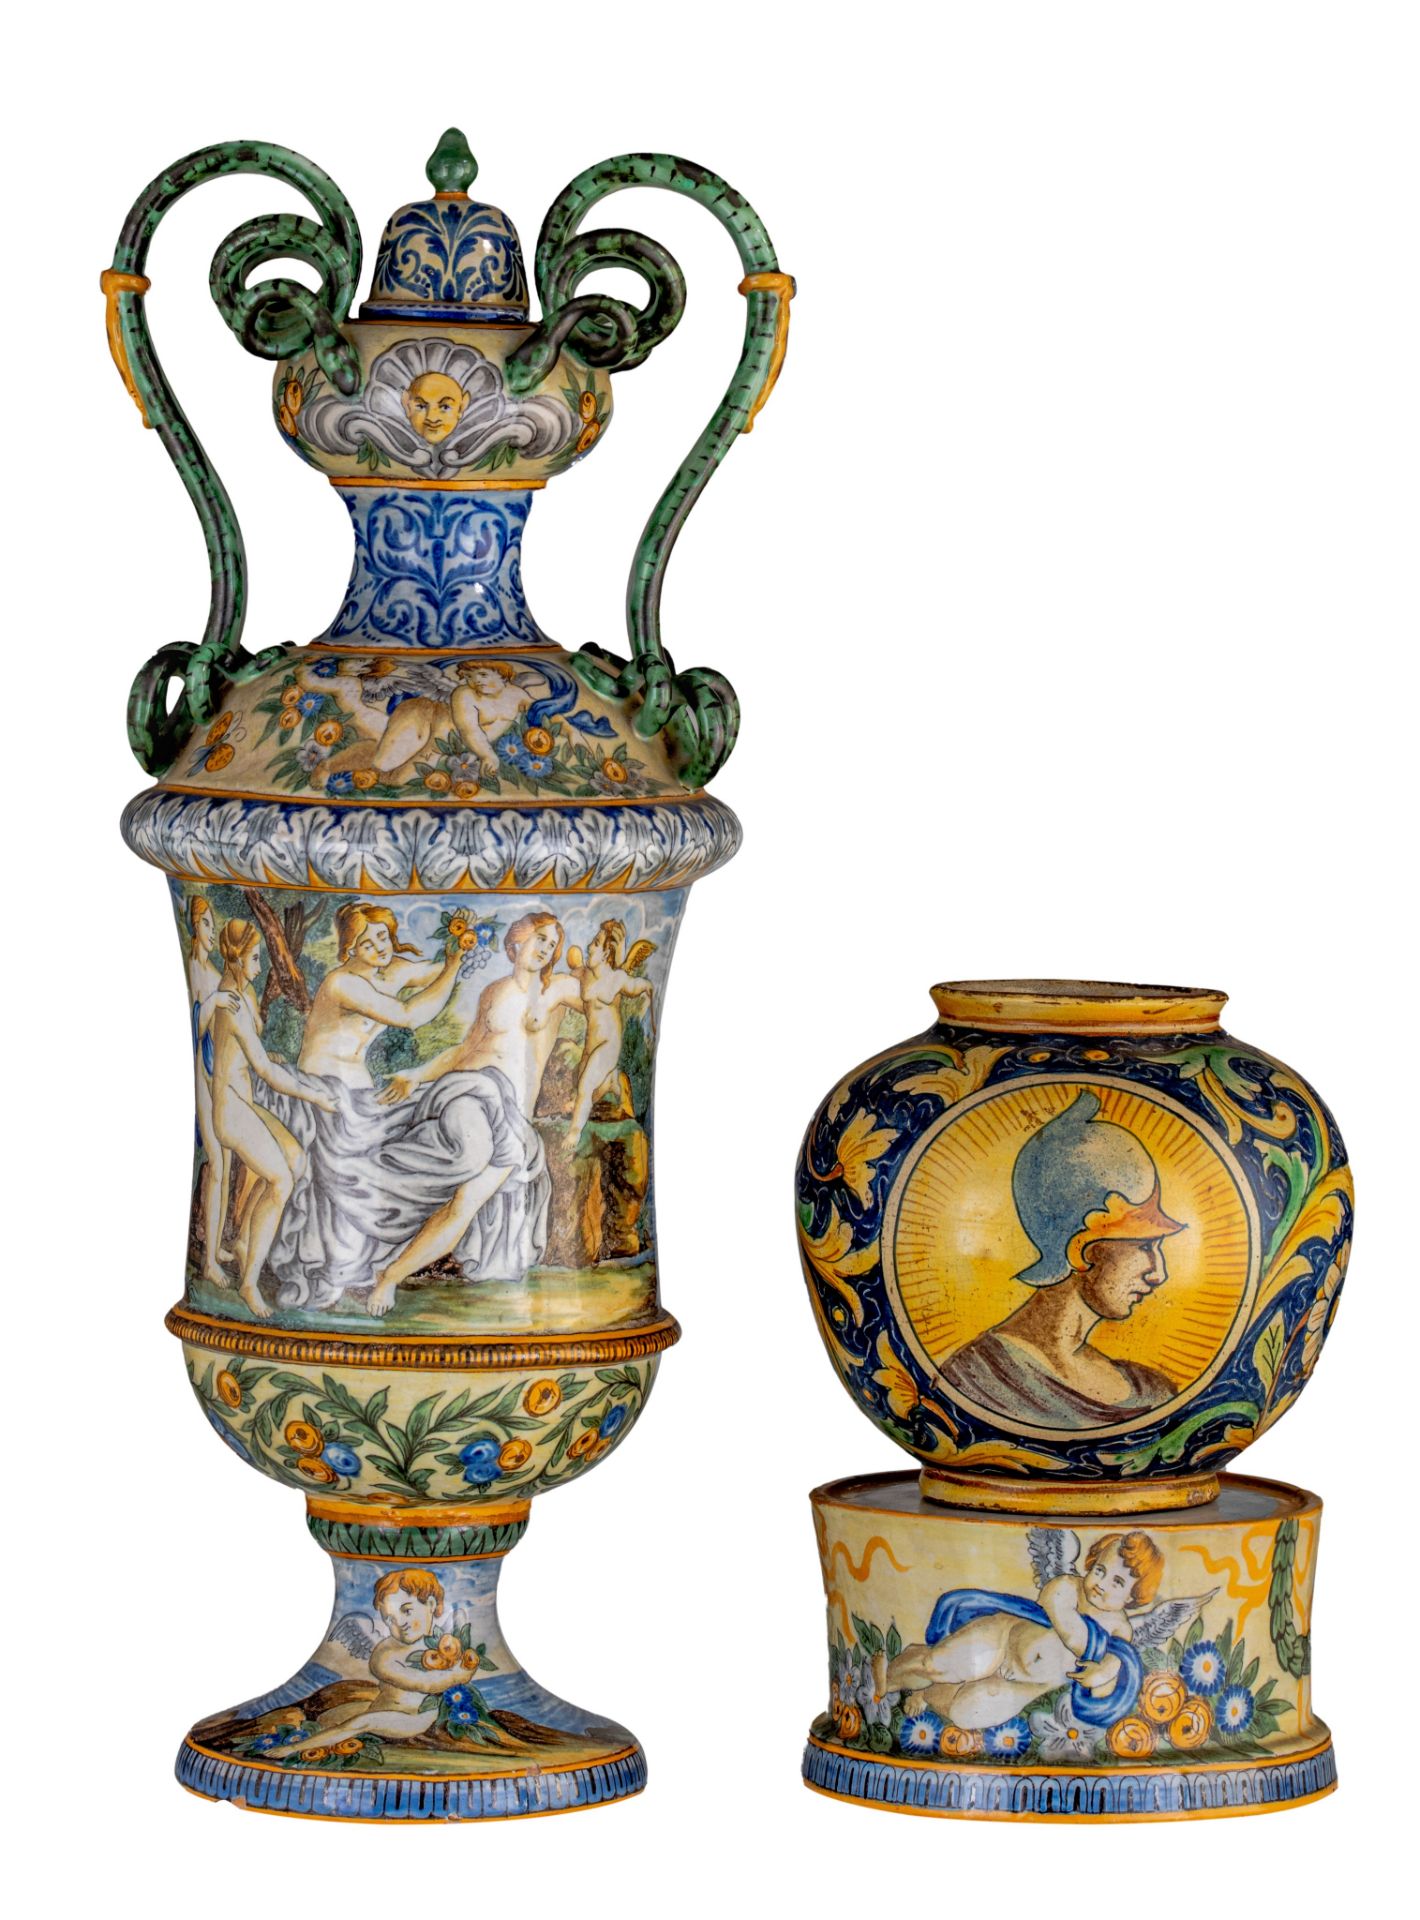 (BIDDING ONLY ON CARLOBONTE.BE) A large majolica type vase on stand, and a matching smaller vase, H